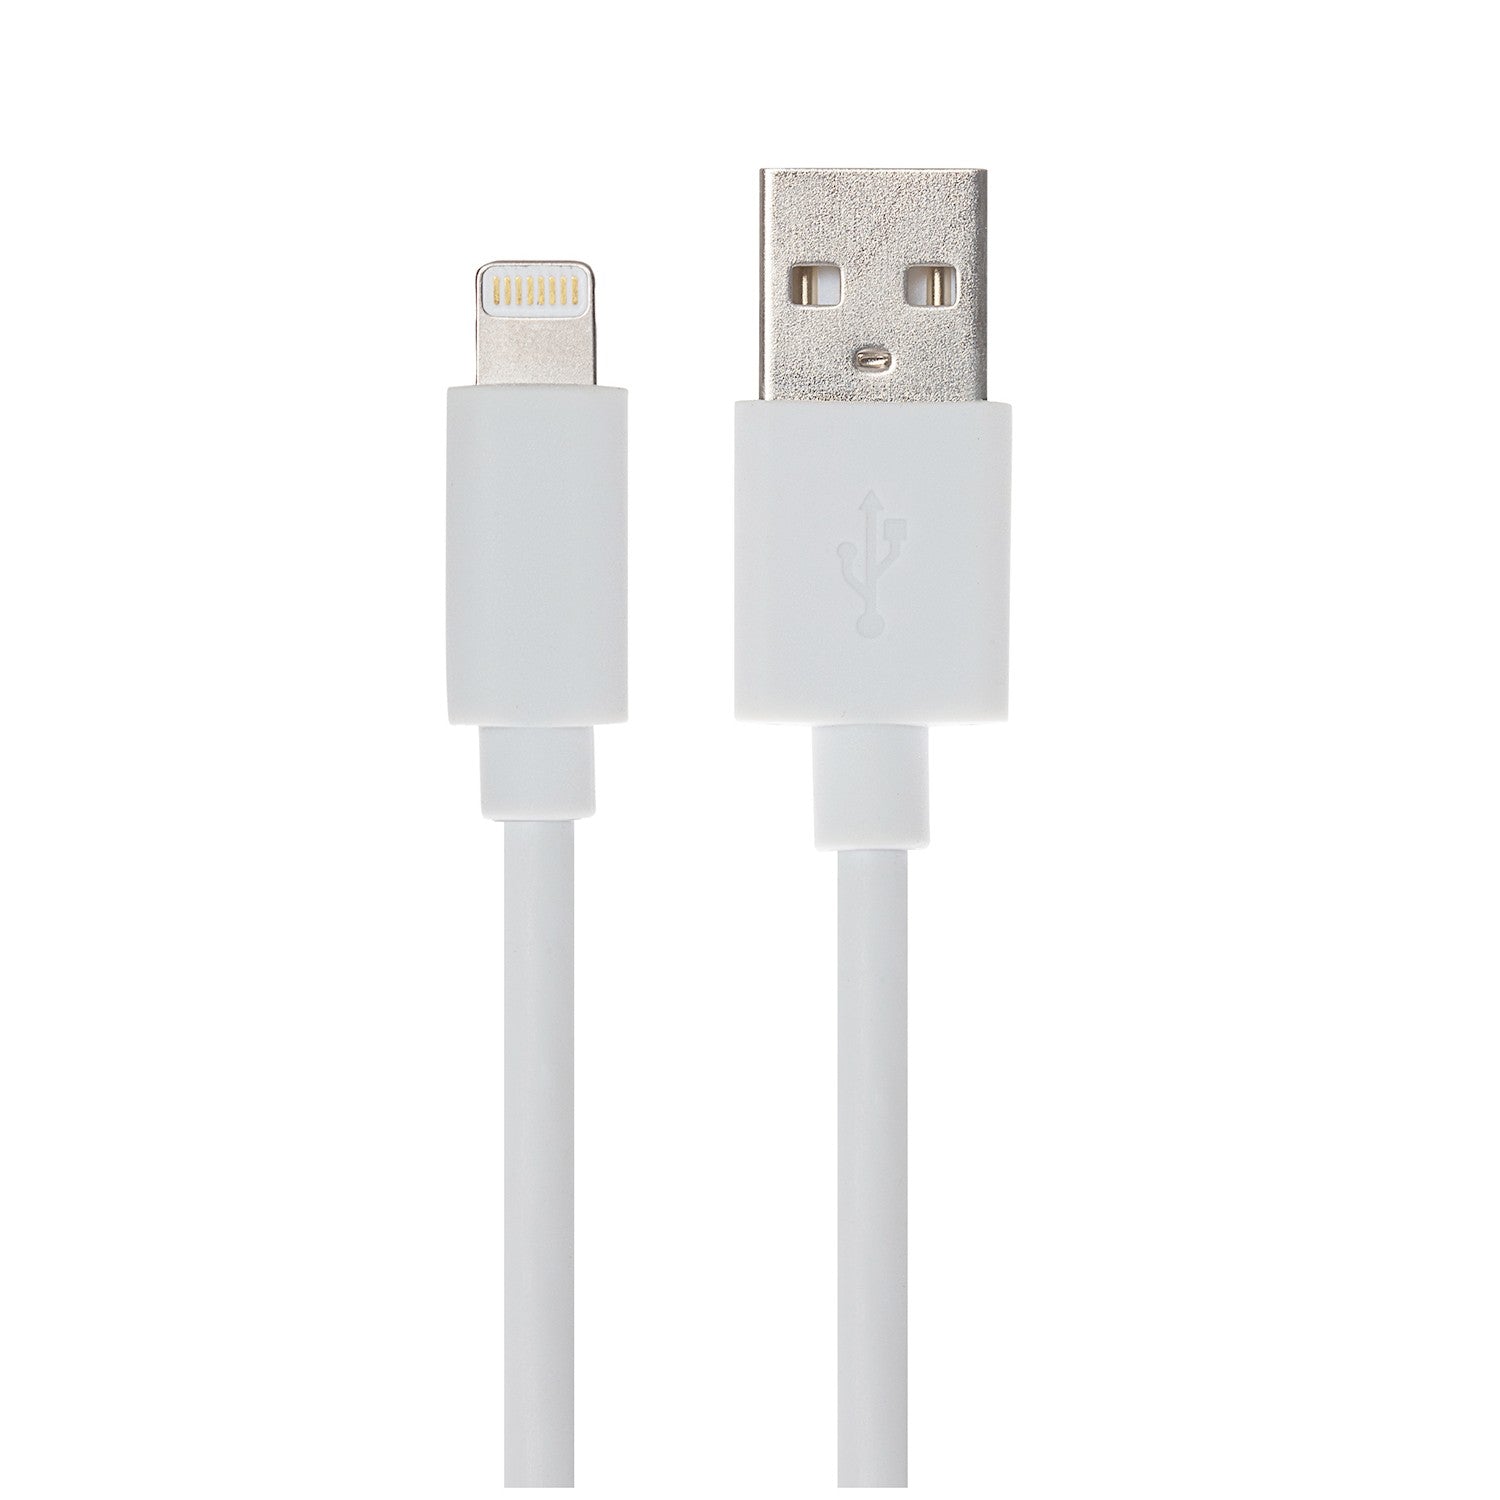 Maplin Premium Apple MFI Certified Tangle-Free Lightning to USB-A 2.0 Cable - White, 3m